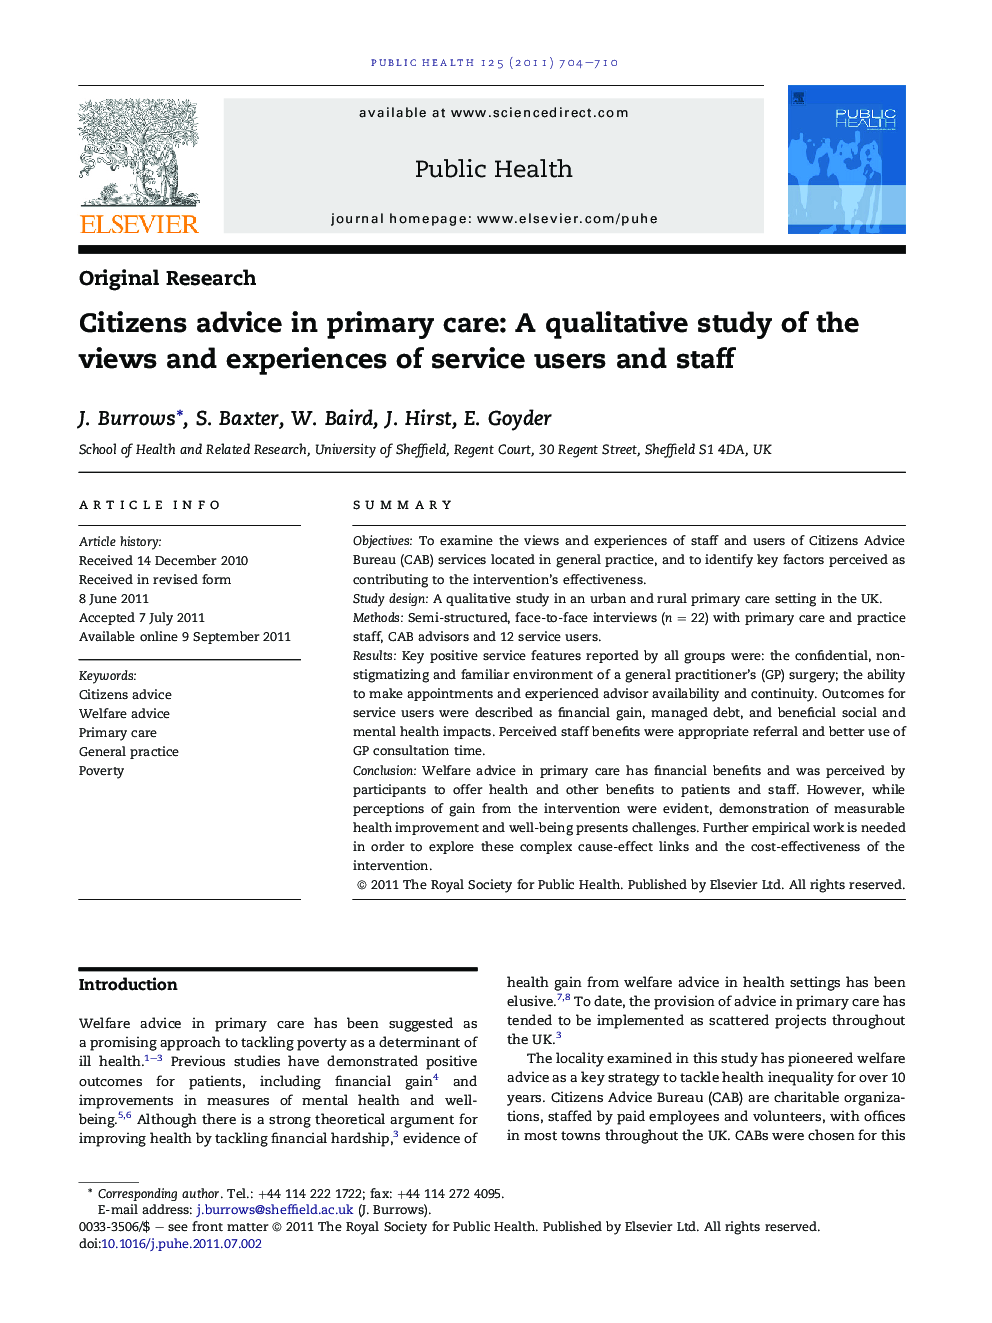 Citizens advice in primary care: A qualitative study of the views and experiences of service users and staff